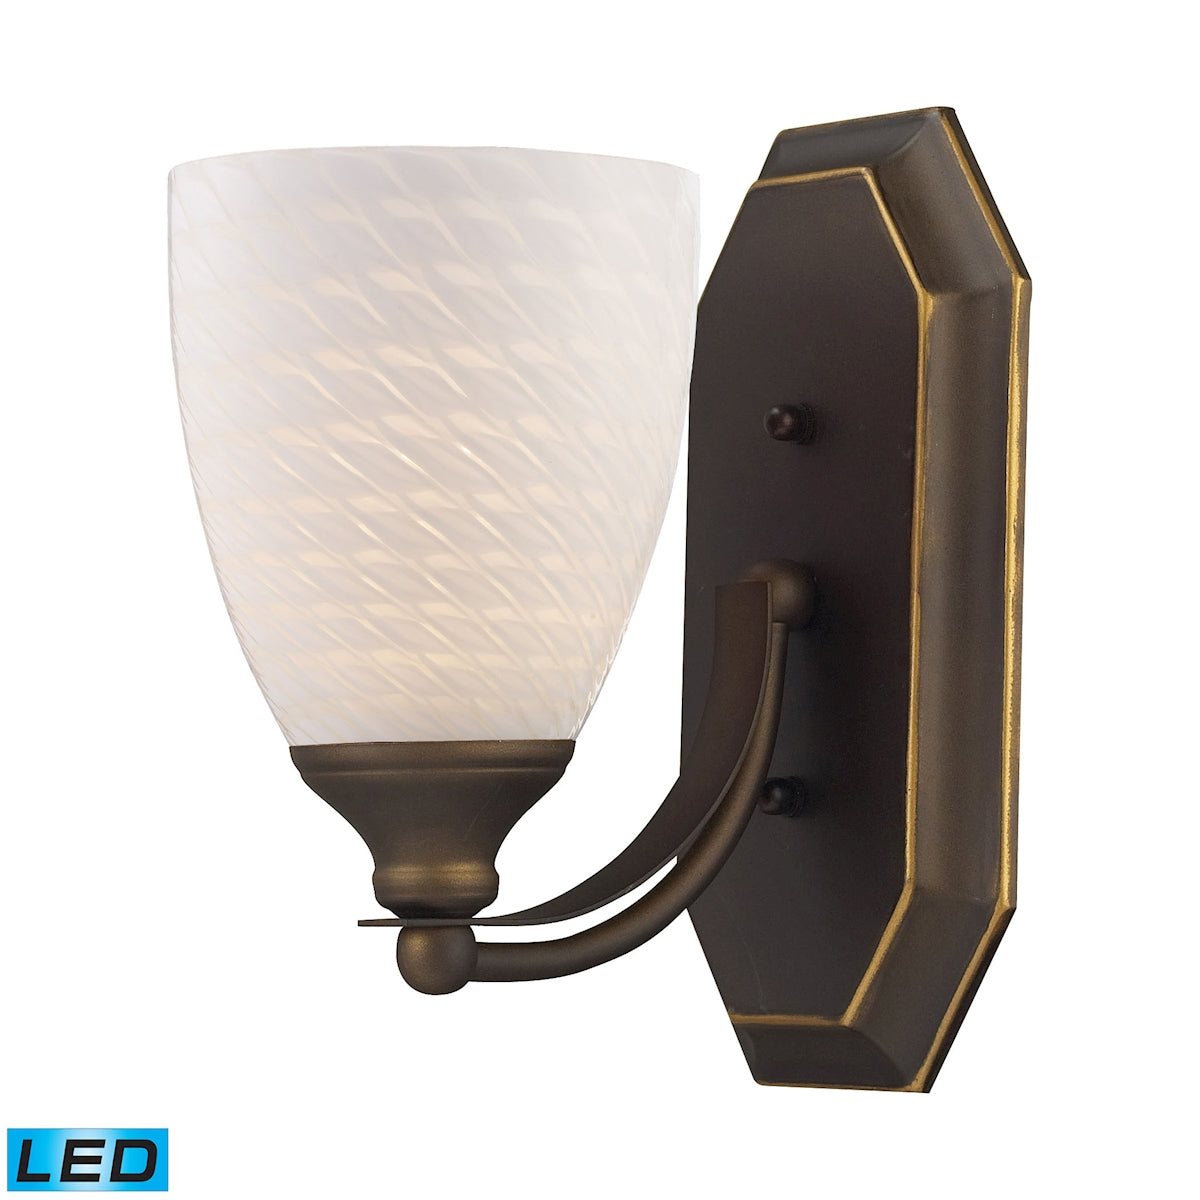 Mix-N-Match Vanity 1-Light Wall Lamp in Aged Bronze with White Swirl Glass - Includes LED Bulb